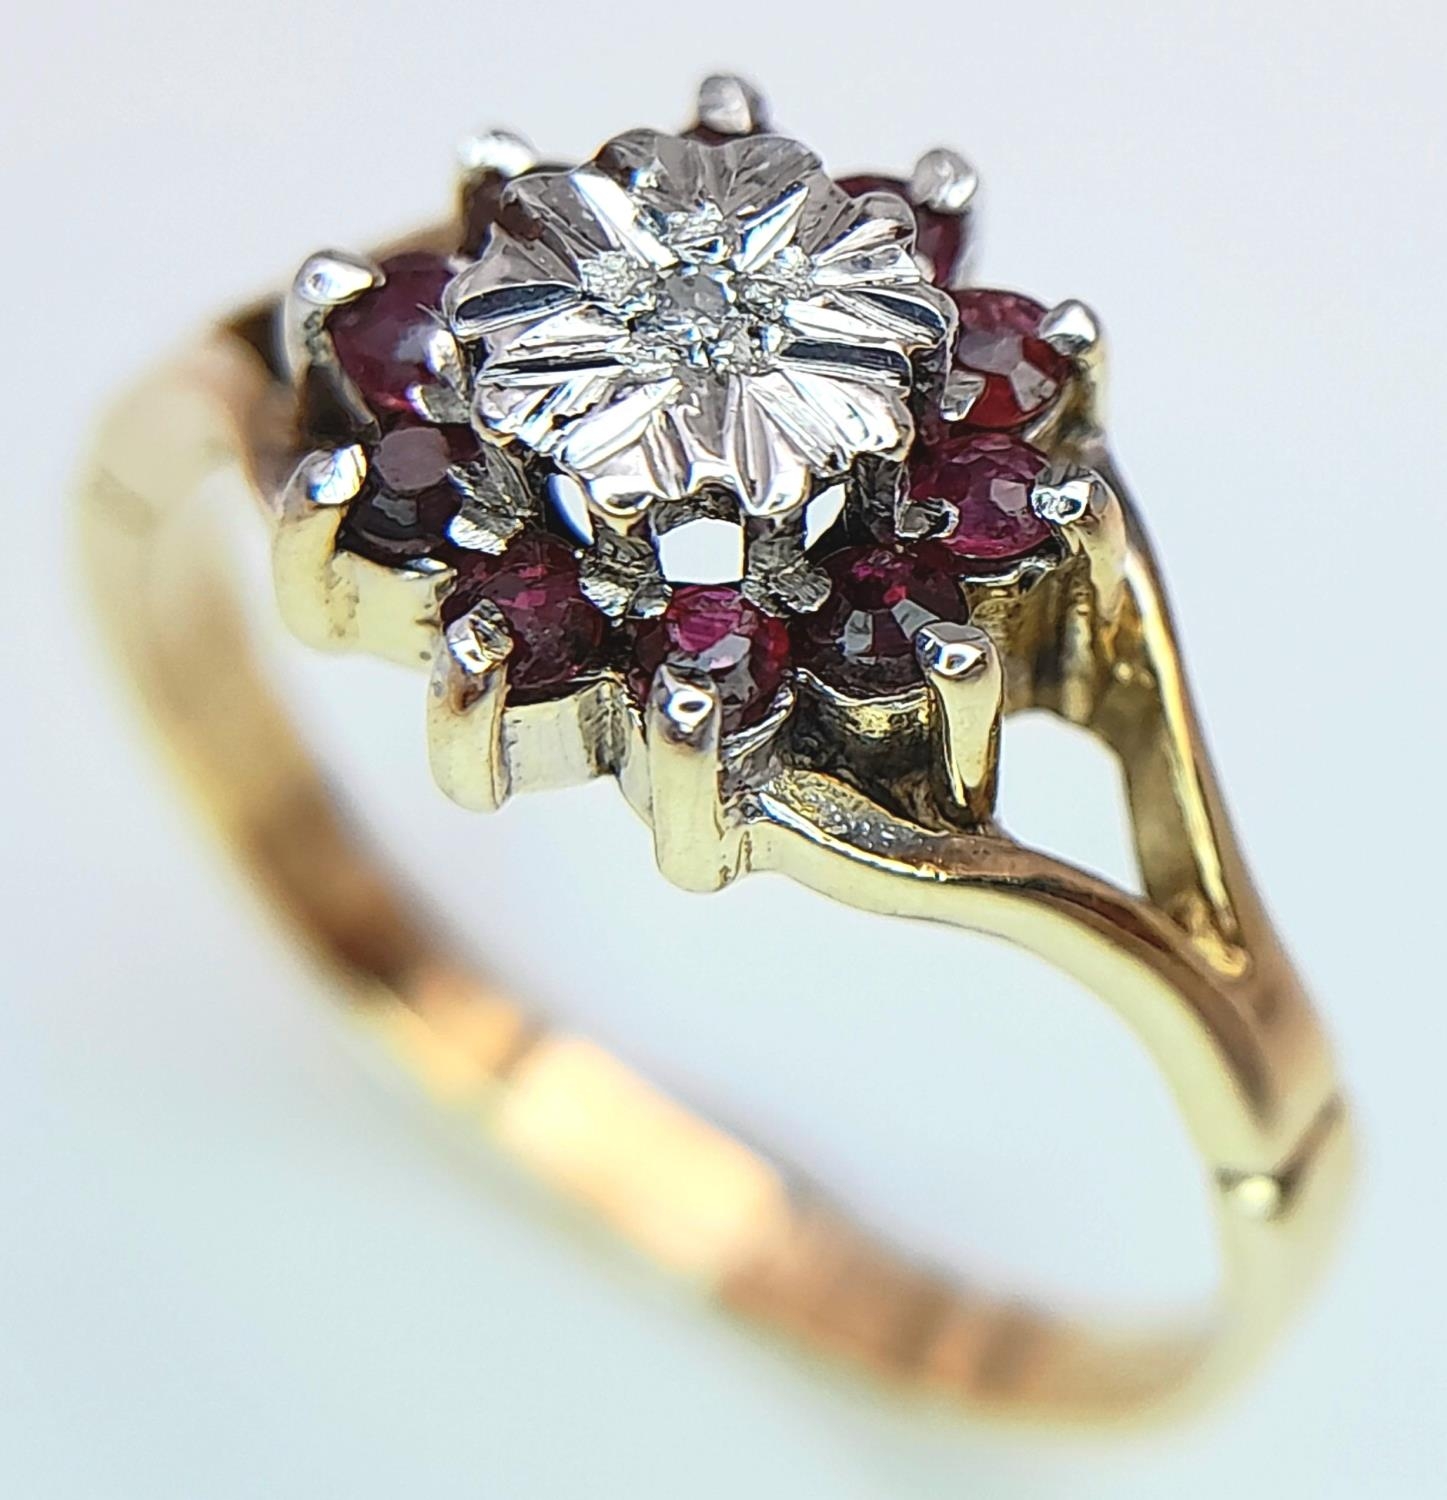 A 9K (TESTED AS) YELLOW GOLD DIAMOND & RUBY CLUSTER RING 1.5G SIZE I 1/2. ref: SPAS 9023 - Image 2 of 5